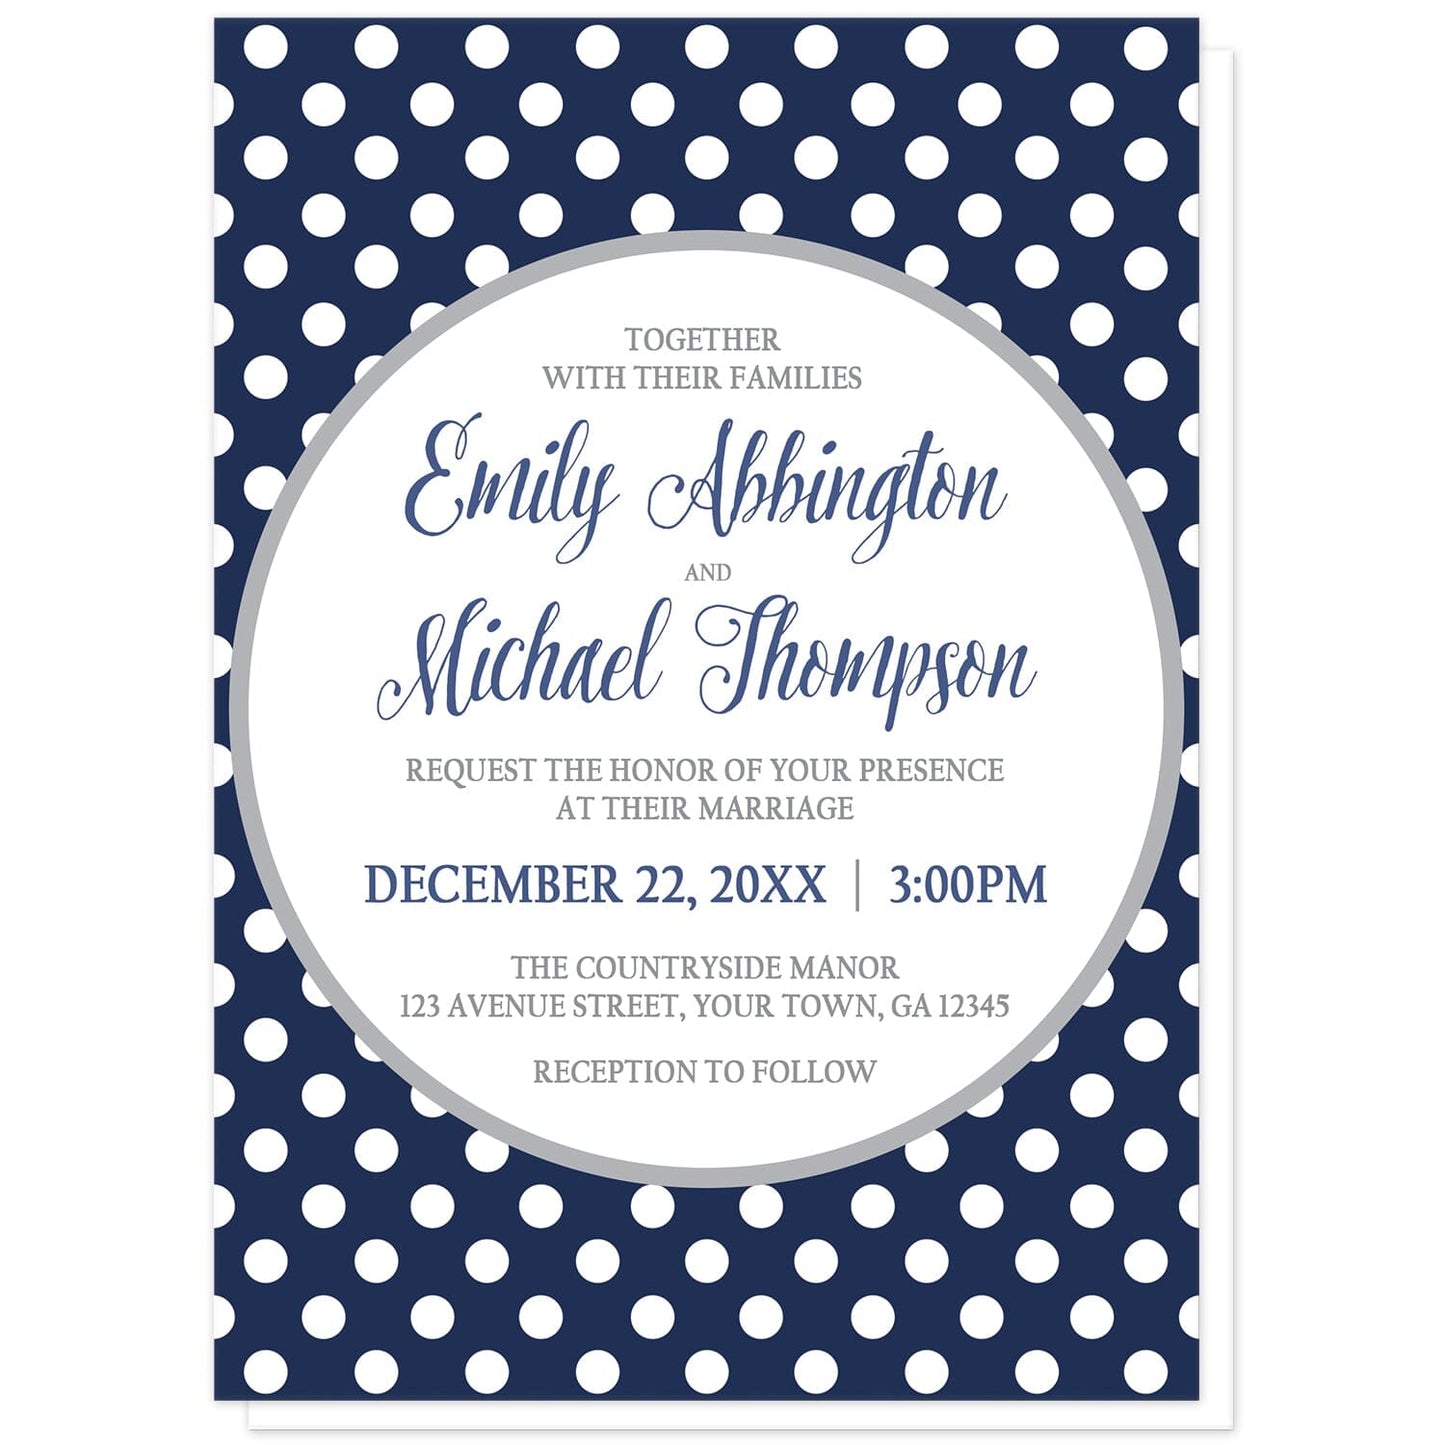 Gray Navy Blue Polka Dot Wedding Invitations at Artistically Invited. Gray navy blue polka dot wedding invitations with your personalized marriage celebration details custom printed in navy blue and gray inside a white circle outlined in light gray, over a navy blue polka dot pattern with white polka dots over blue.